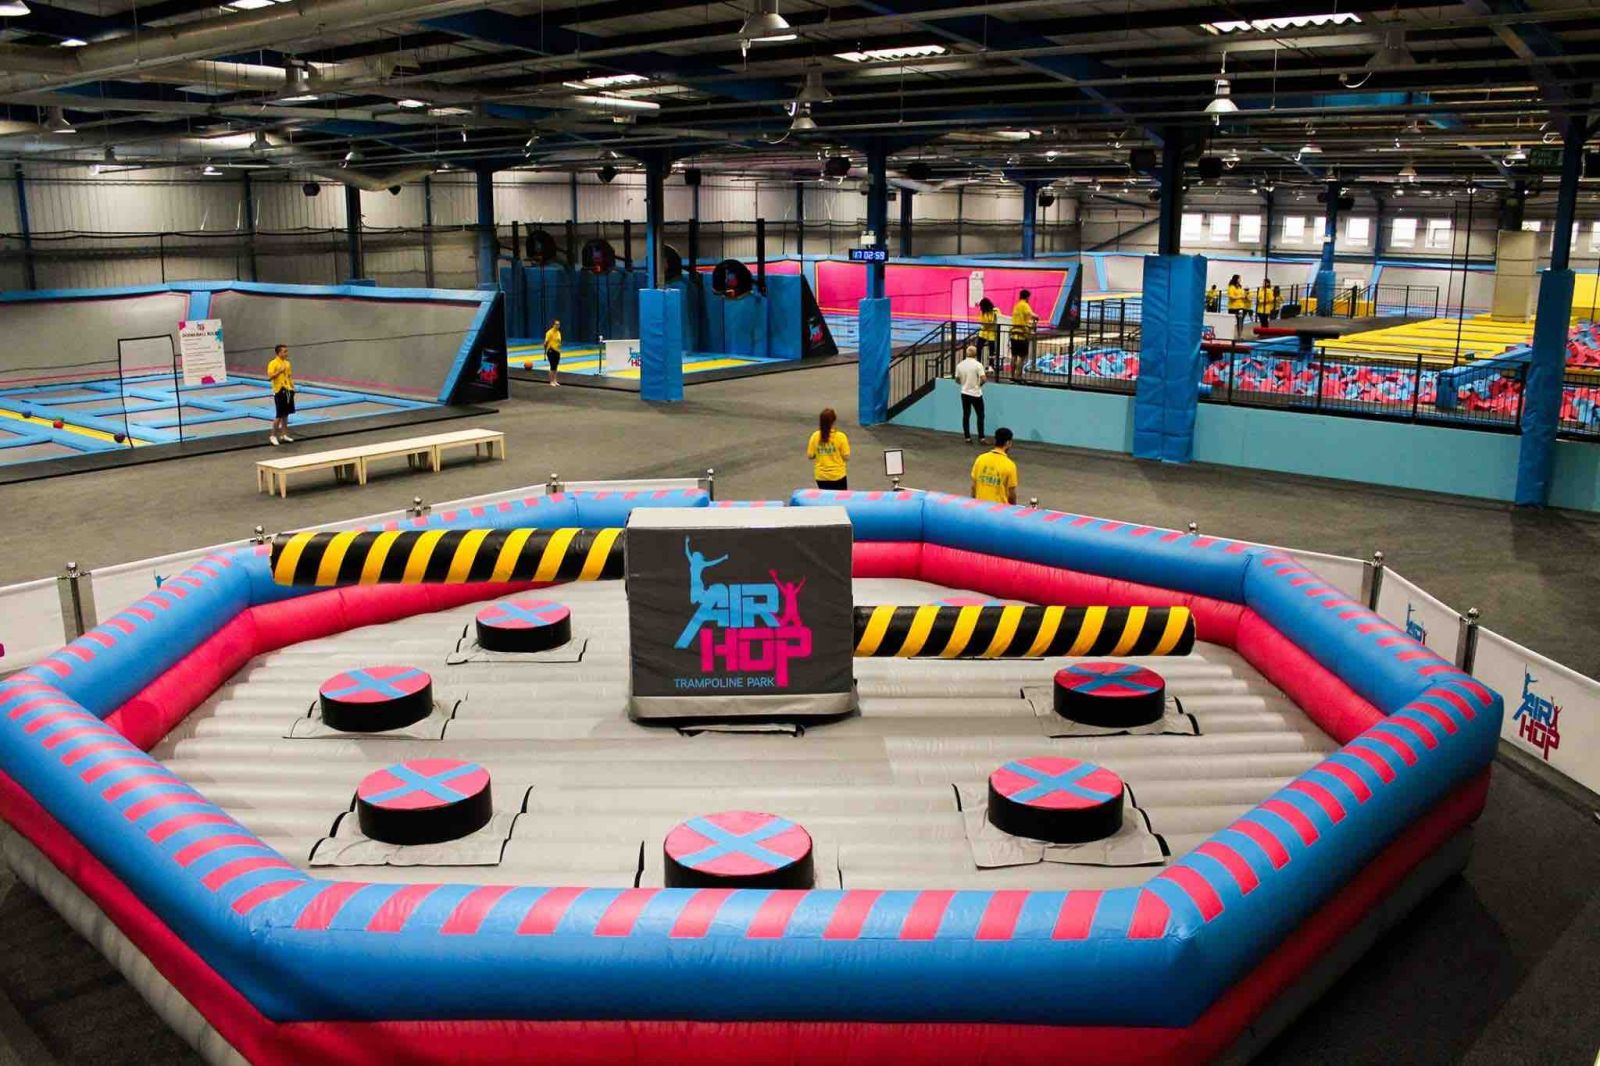 30% off this Easter Sunday with AirHop Bristol 